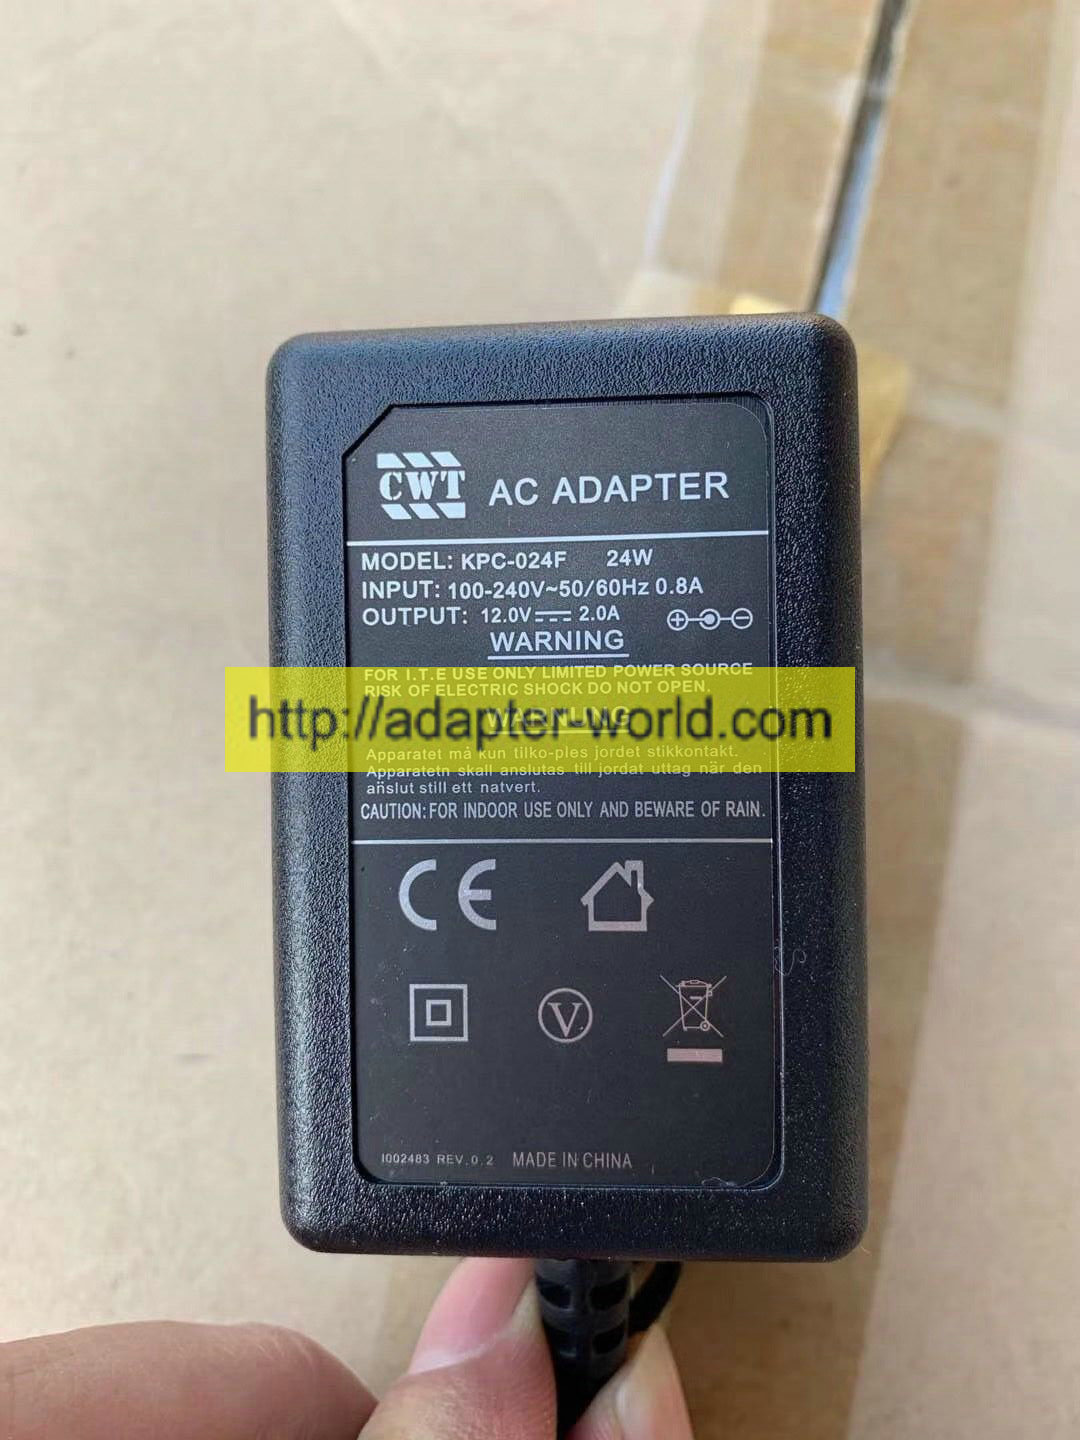 *100% Brand NEW* CWT 12.0V---2.0A KPC-024F 24W AC Adapter Free shipping! - Click Image to Close